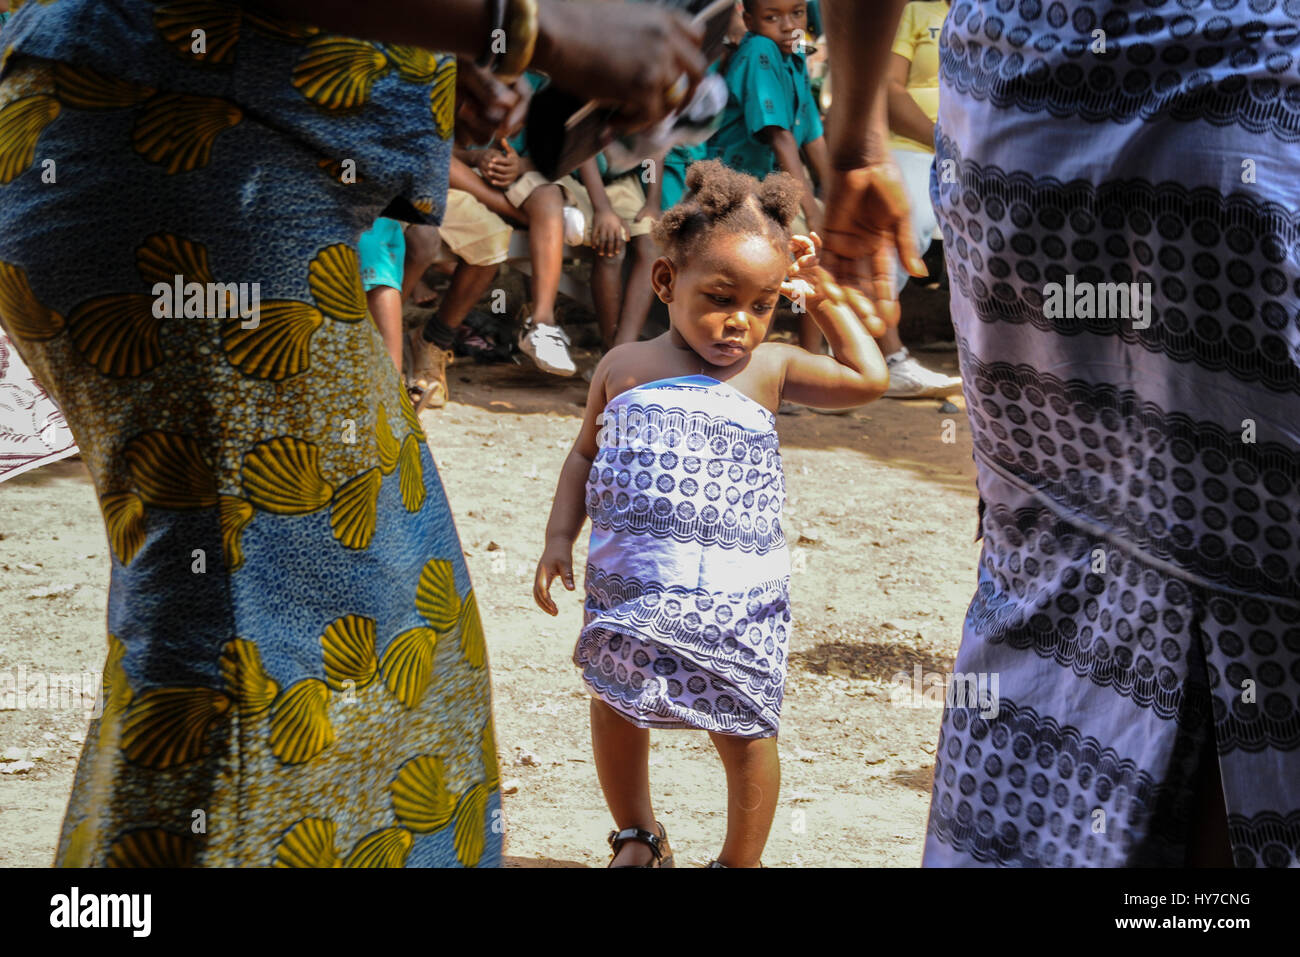 A baby girl stands in the middle of a dance circle during a festival in rural Ghana. Stock Photo